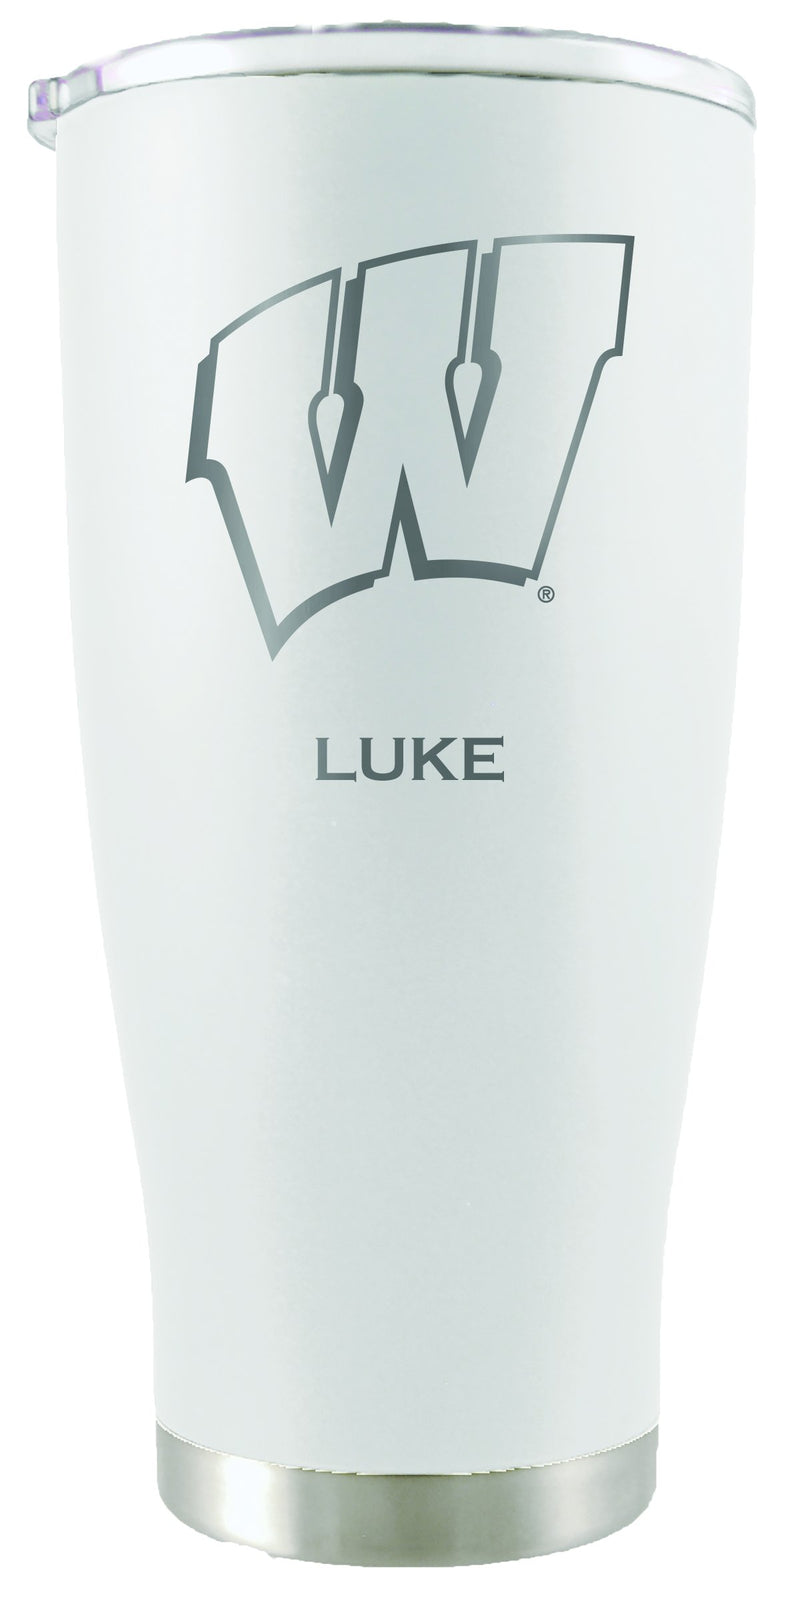 20oz White Personalized Stainless Steel Tumbler | Wisconsin Badgers
COL, CurrentProduct, Drinkware_category_All, Personalized_Personalized, WIS, Wisconsin Badgers
The Memory Company